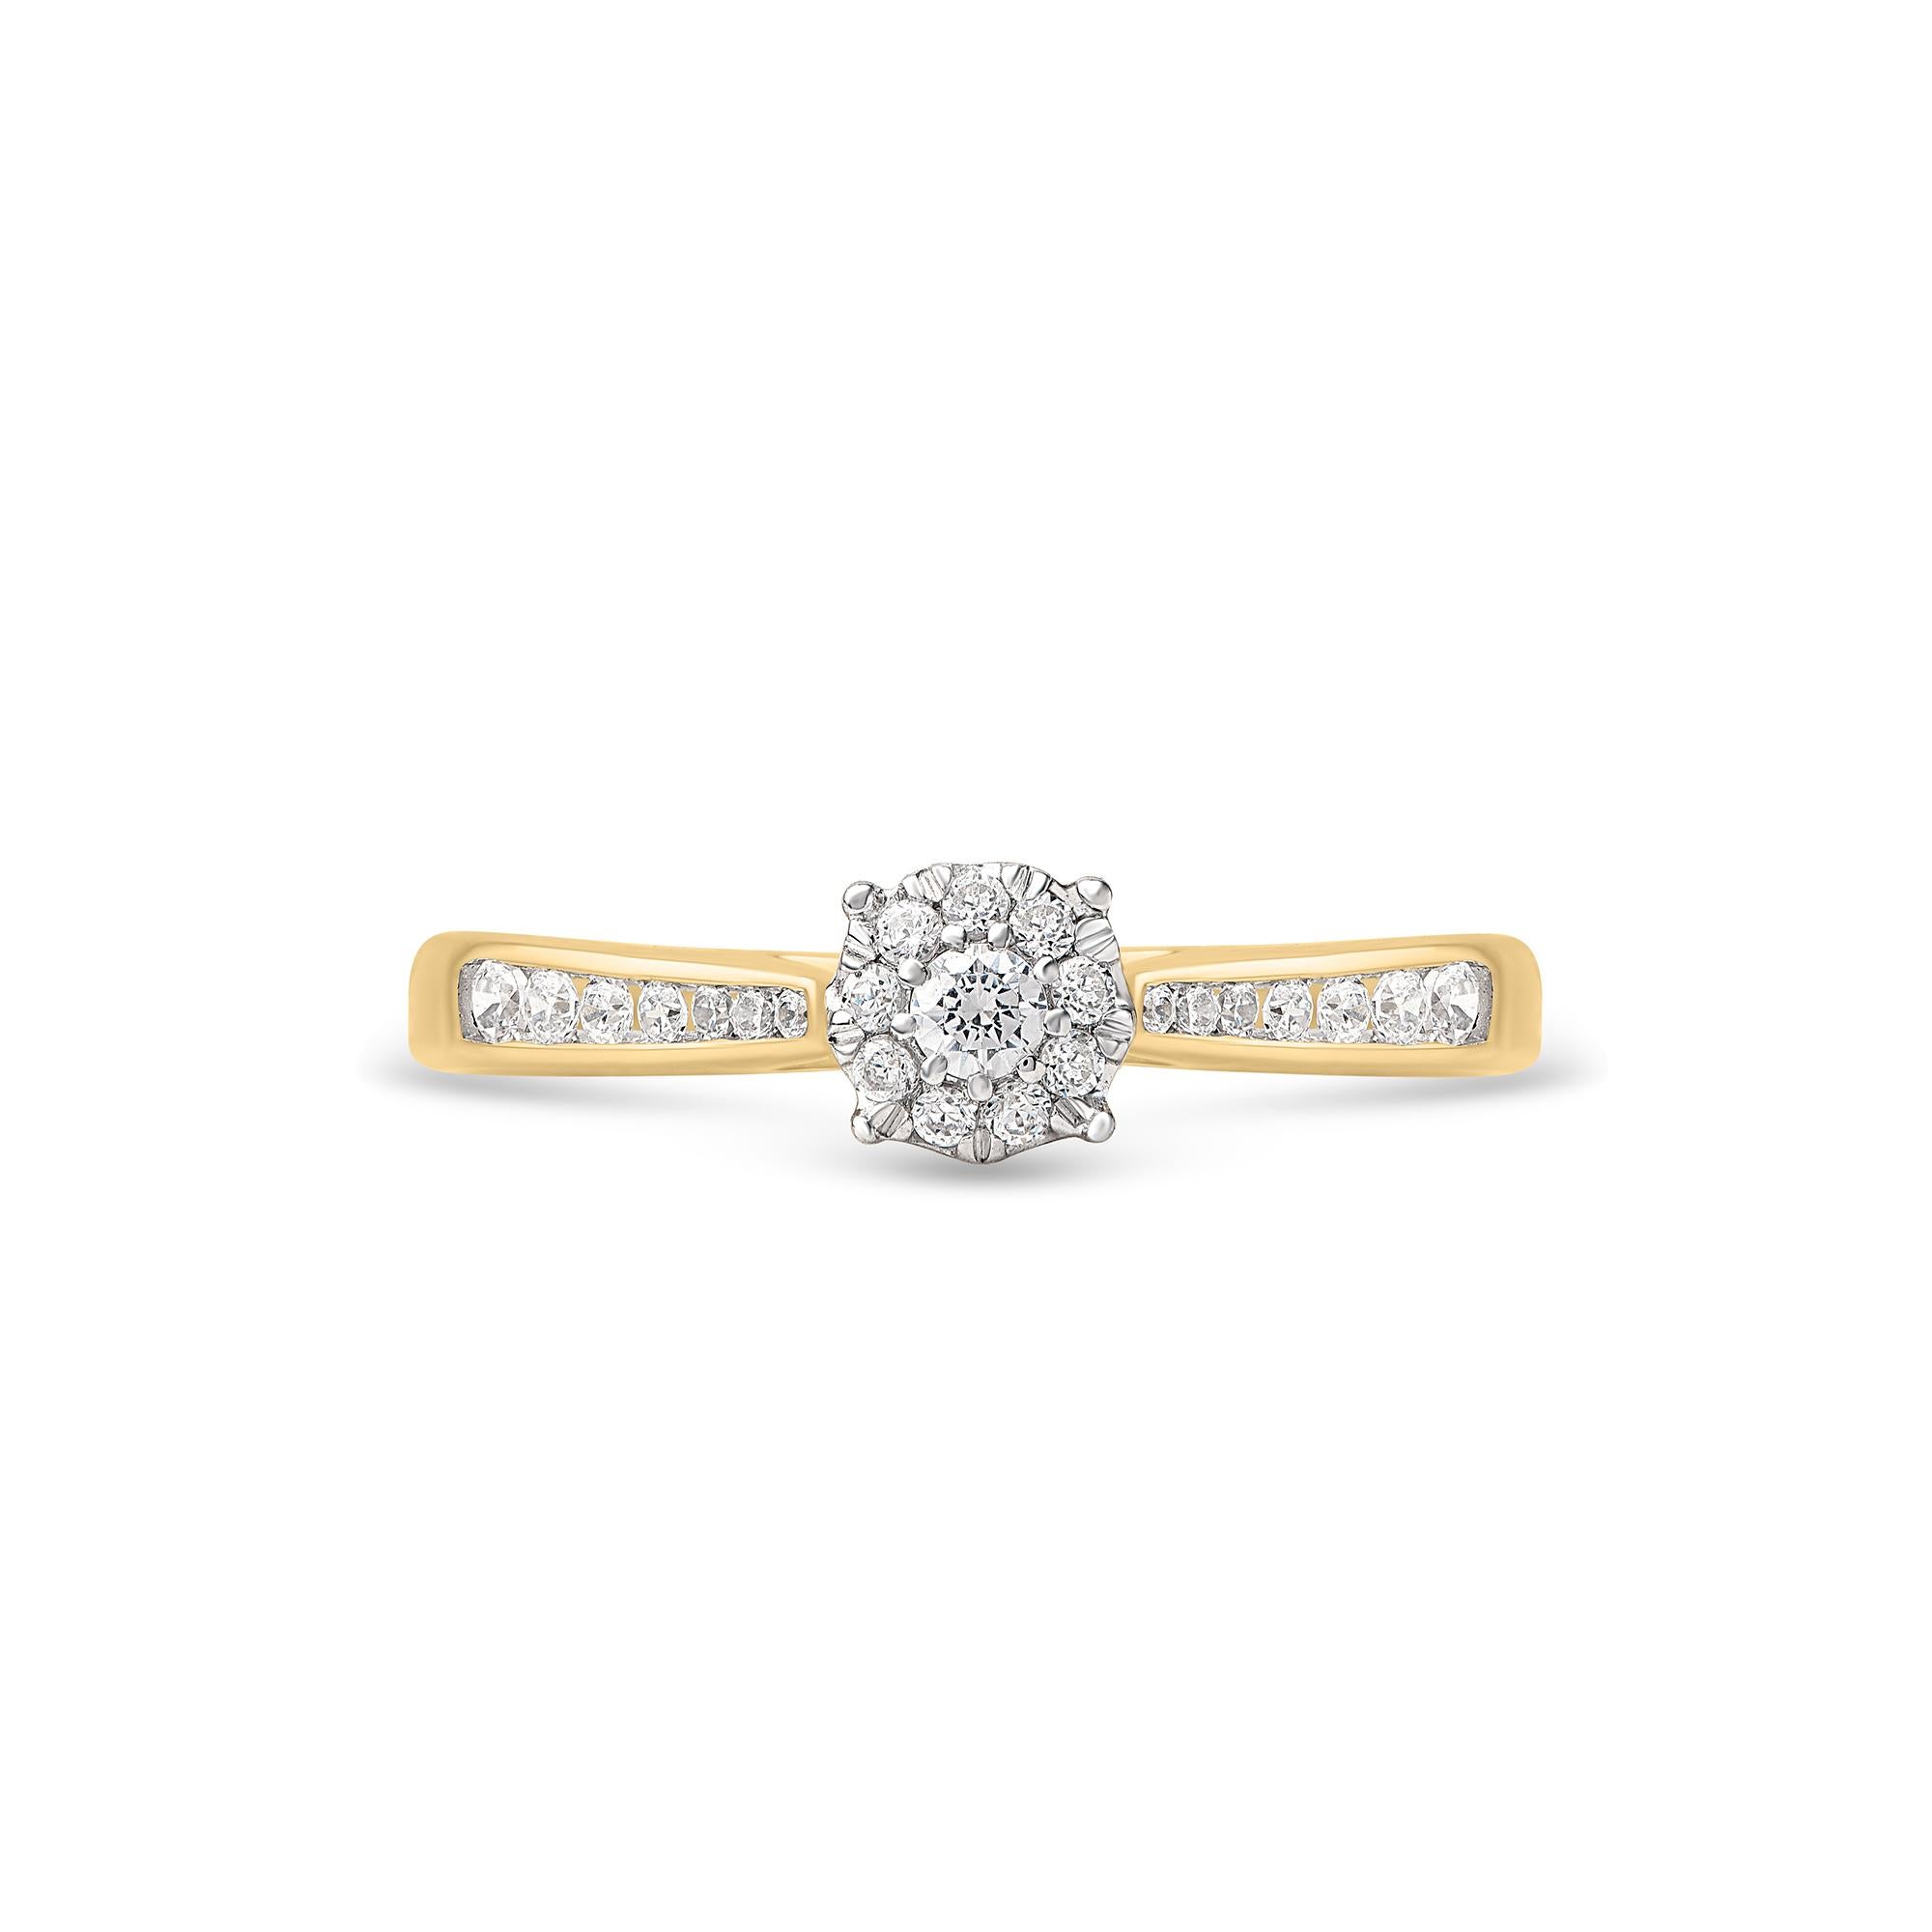 Express your love for her in the most classic way with this solitaire engagement ring. Beautifully crafted by our inhouse experts in 14 karat yellow gold and embellished with 24 brilliant cut and single cut round diamond set in prong and channel